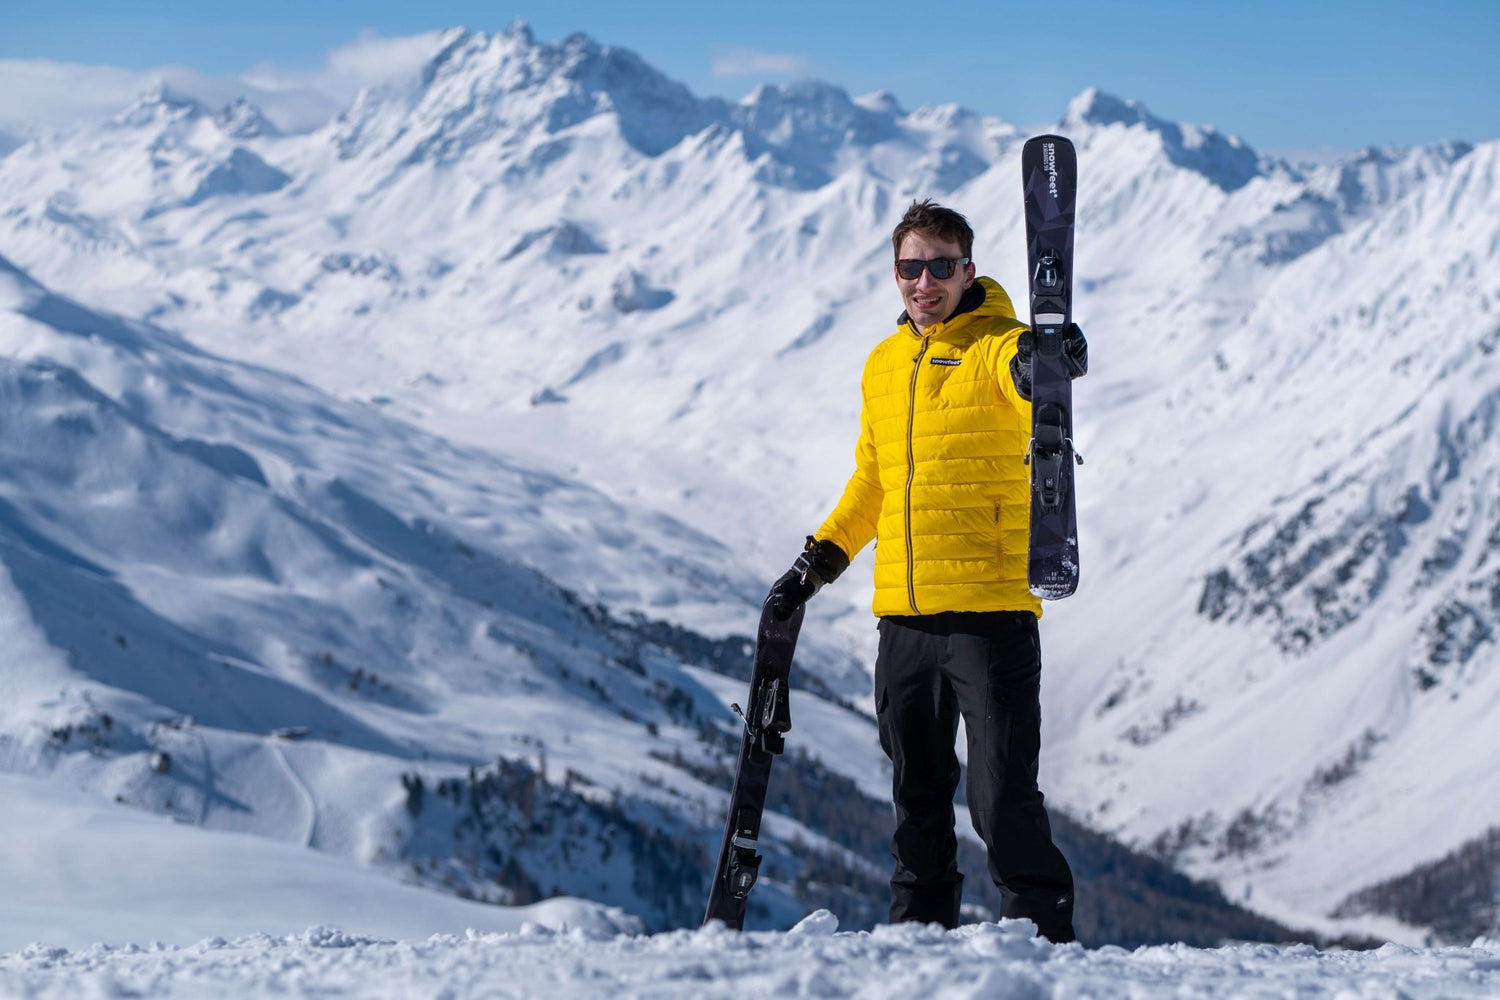 Snowblades  | Skiboards | Skiblades - All You Need To Know About Short Skis - snowfeet*